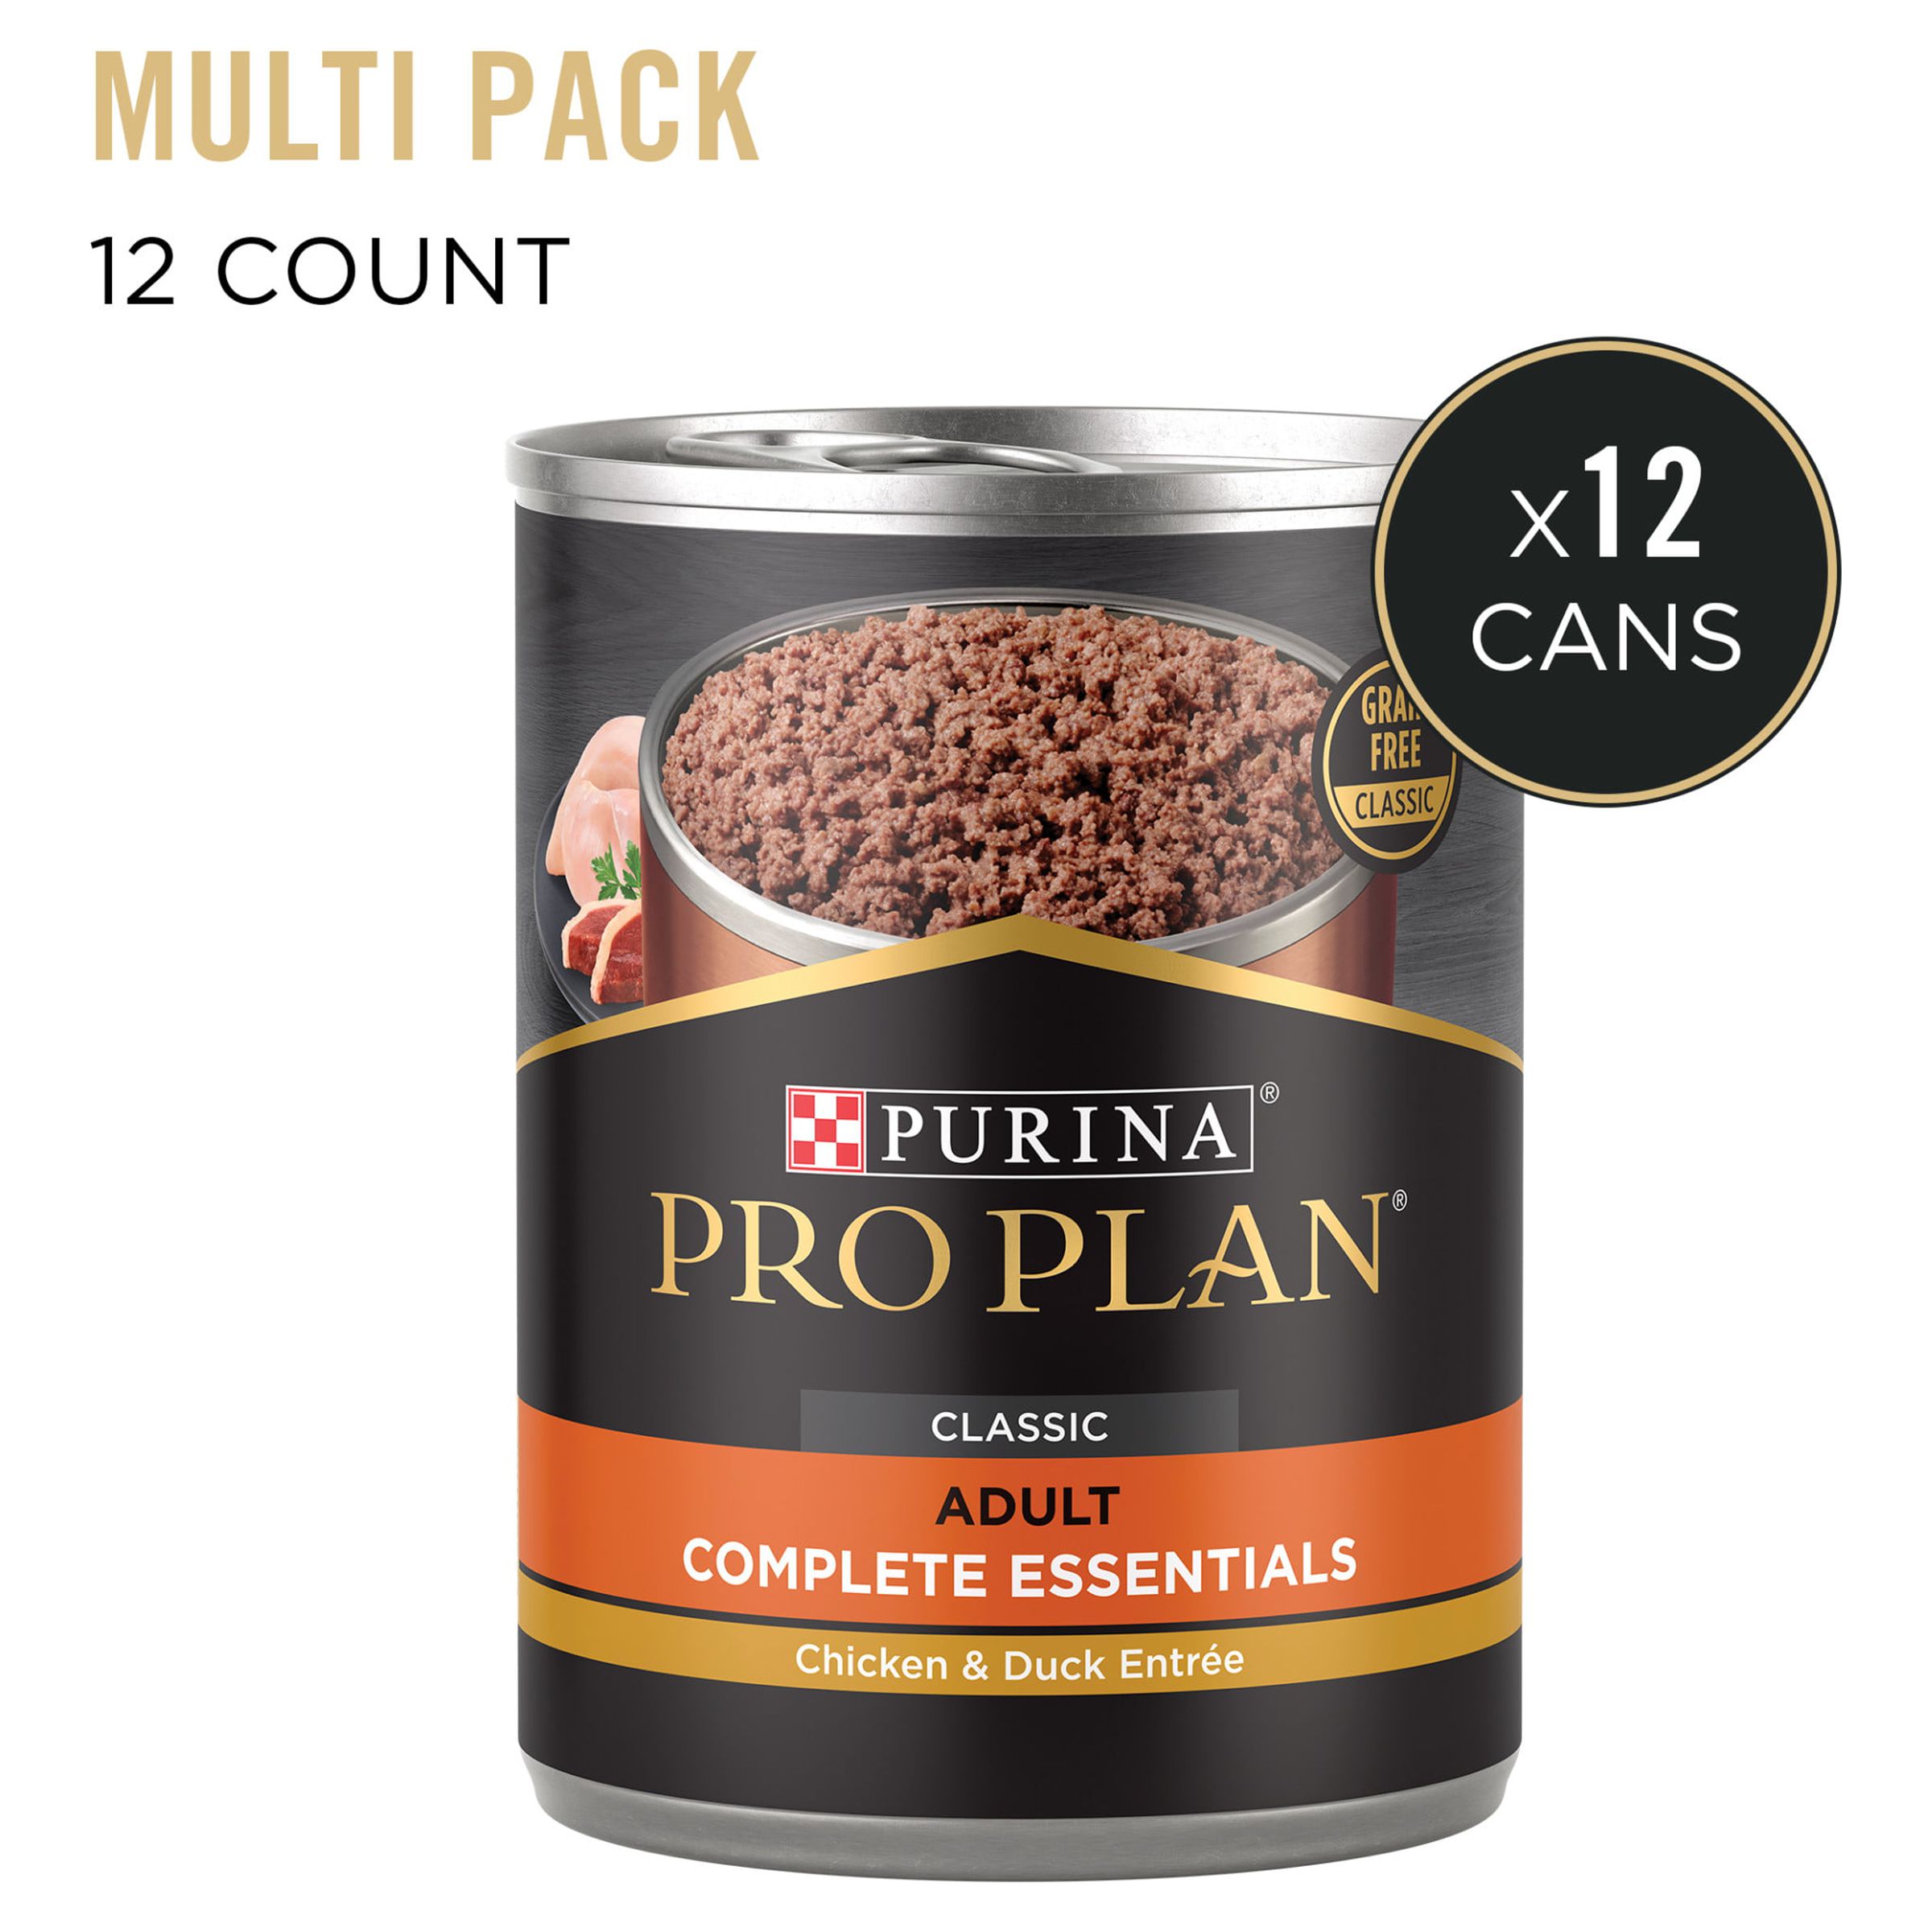 (12 Pack) Purina Pro Plan Grain Free, High Protein Wet Dog Food, COMPLETE ESSENTIALS Classic Chicken & Duck Entree, 13 oz. Cans - image 3 of 10